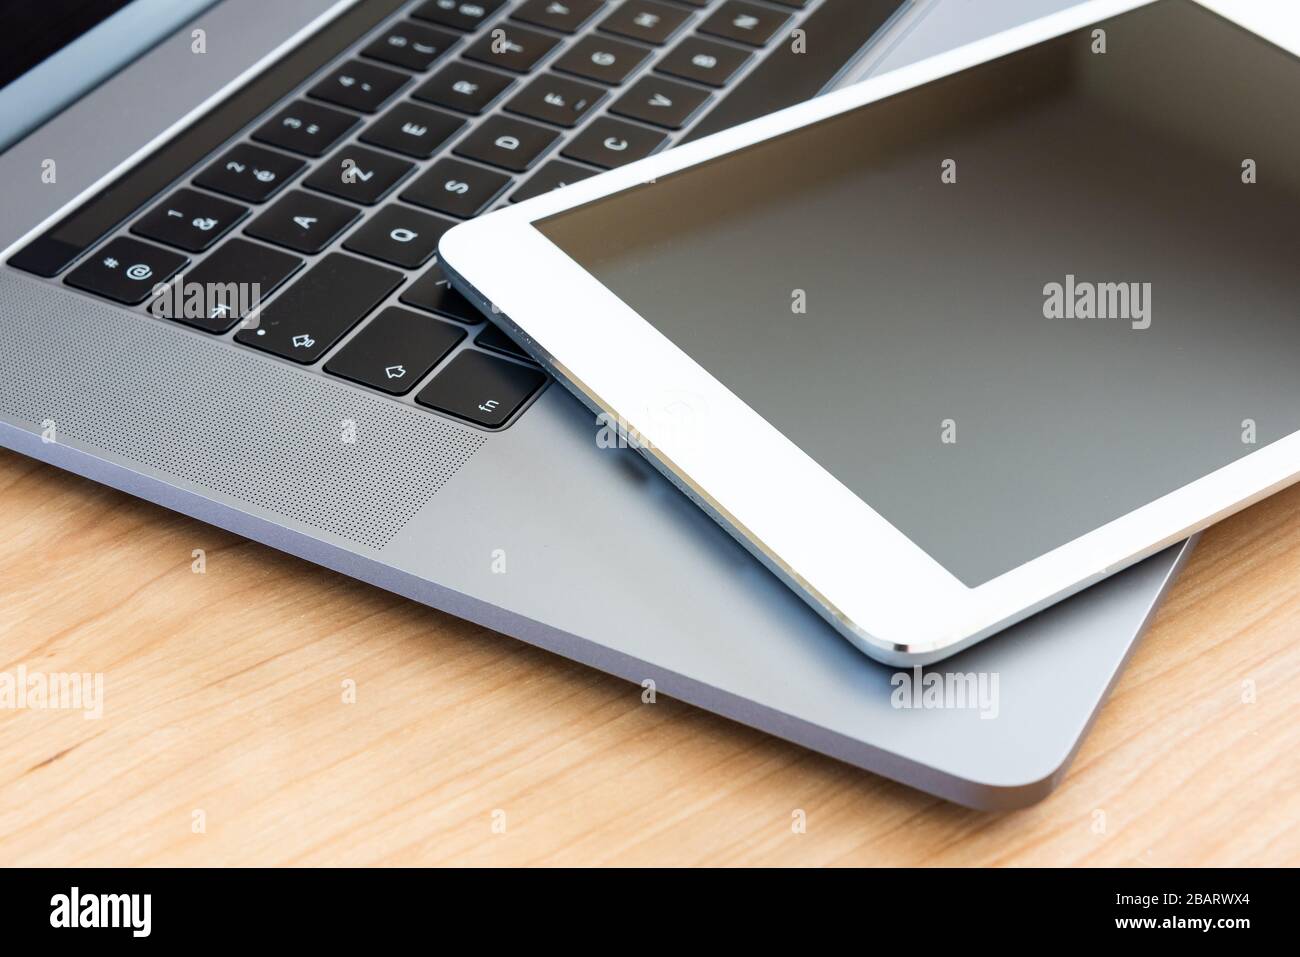 A white tablet and a laptop computer on a wooden surface. Stock Photo